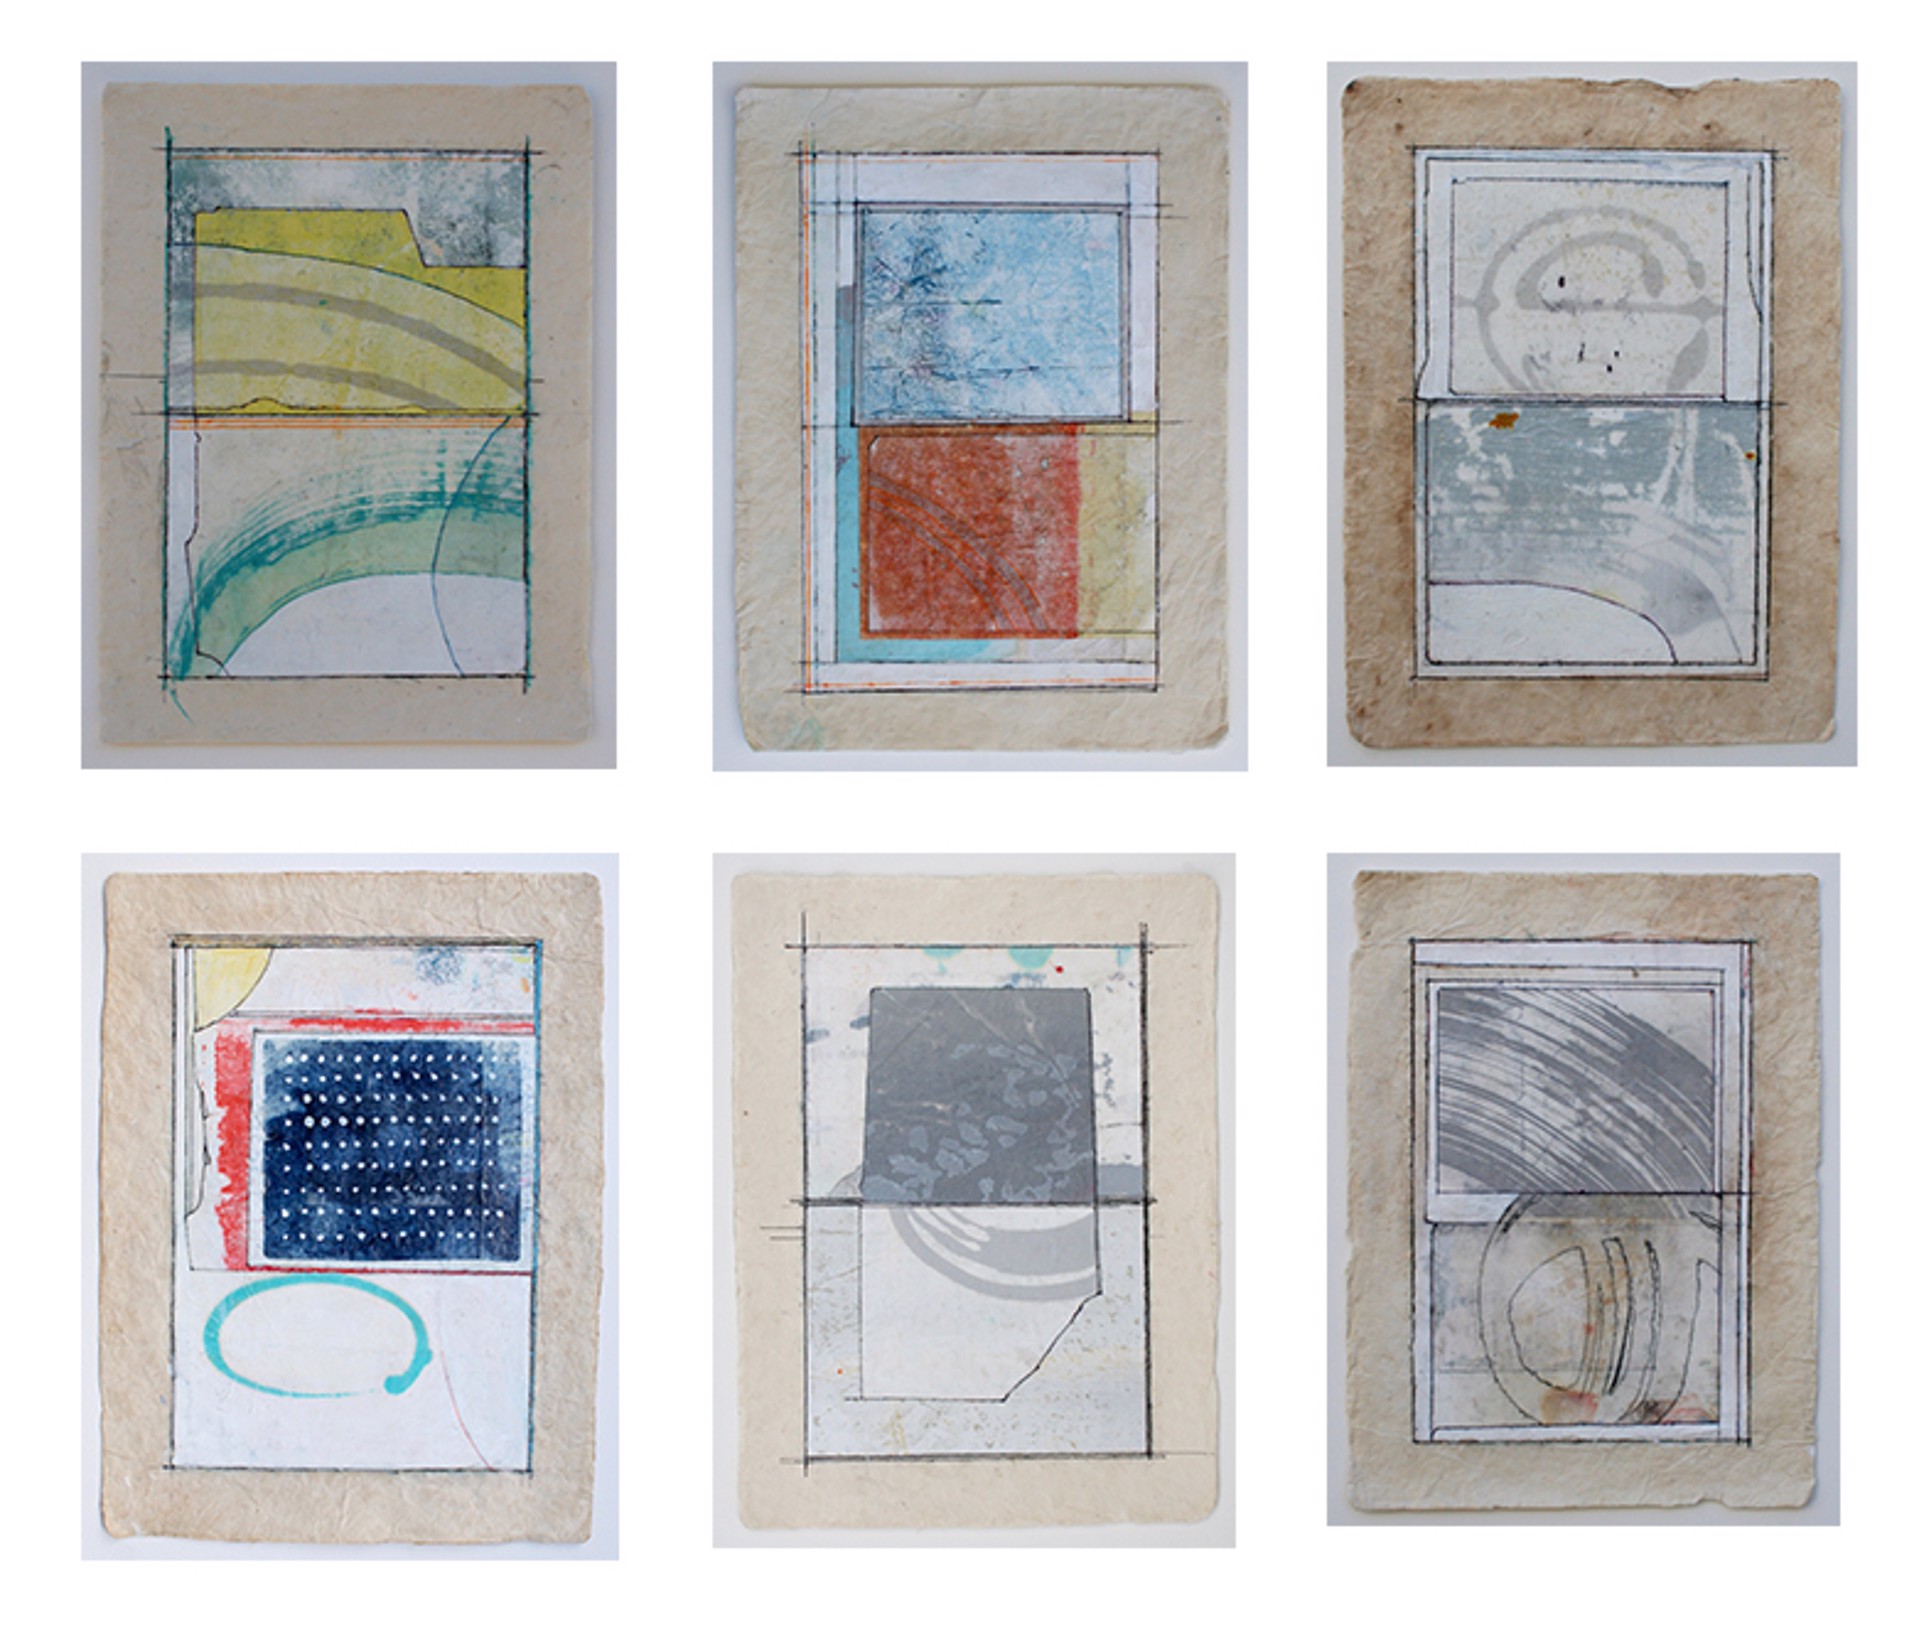 Small Works on Paper by Lisa Weiss